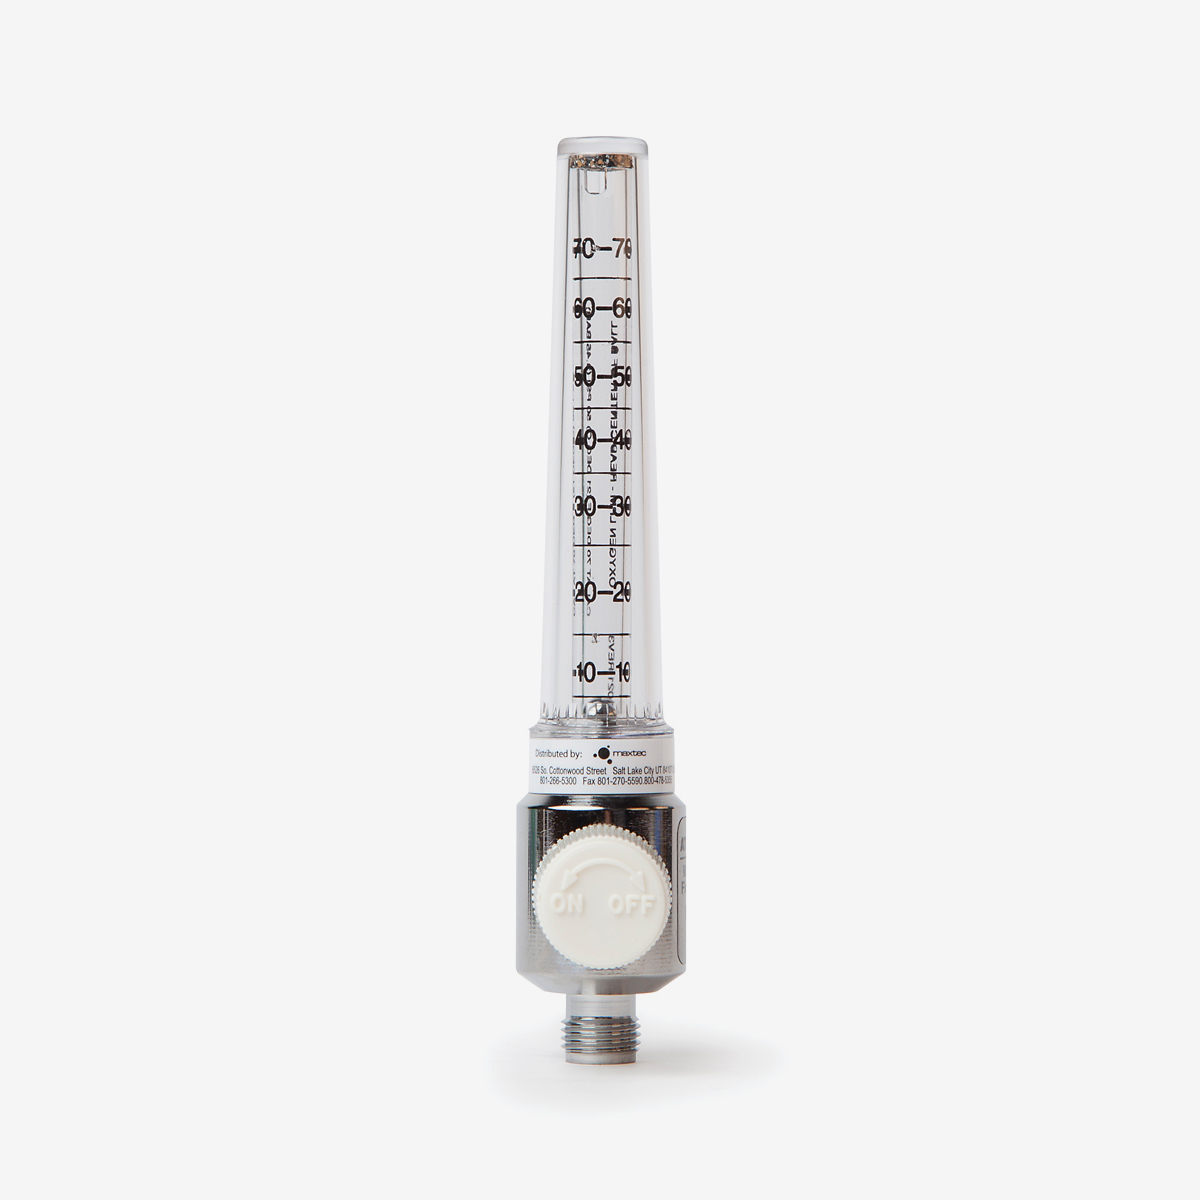 0-70 liters per minute 60 psi flow meter with white knob on white background